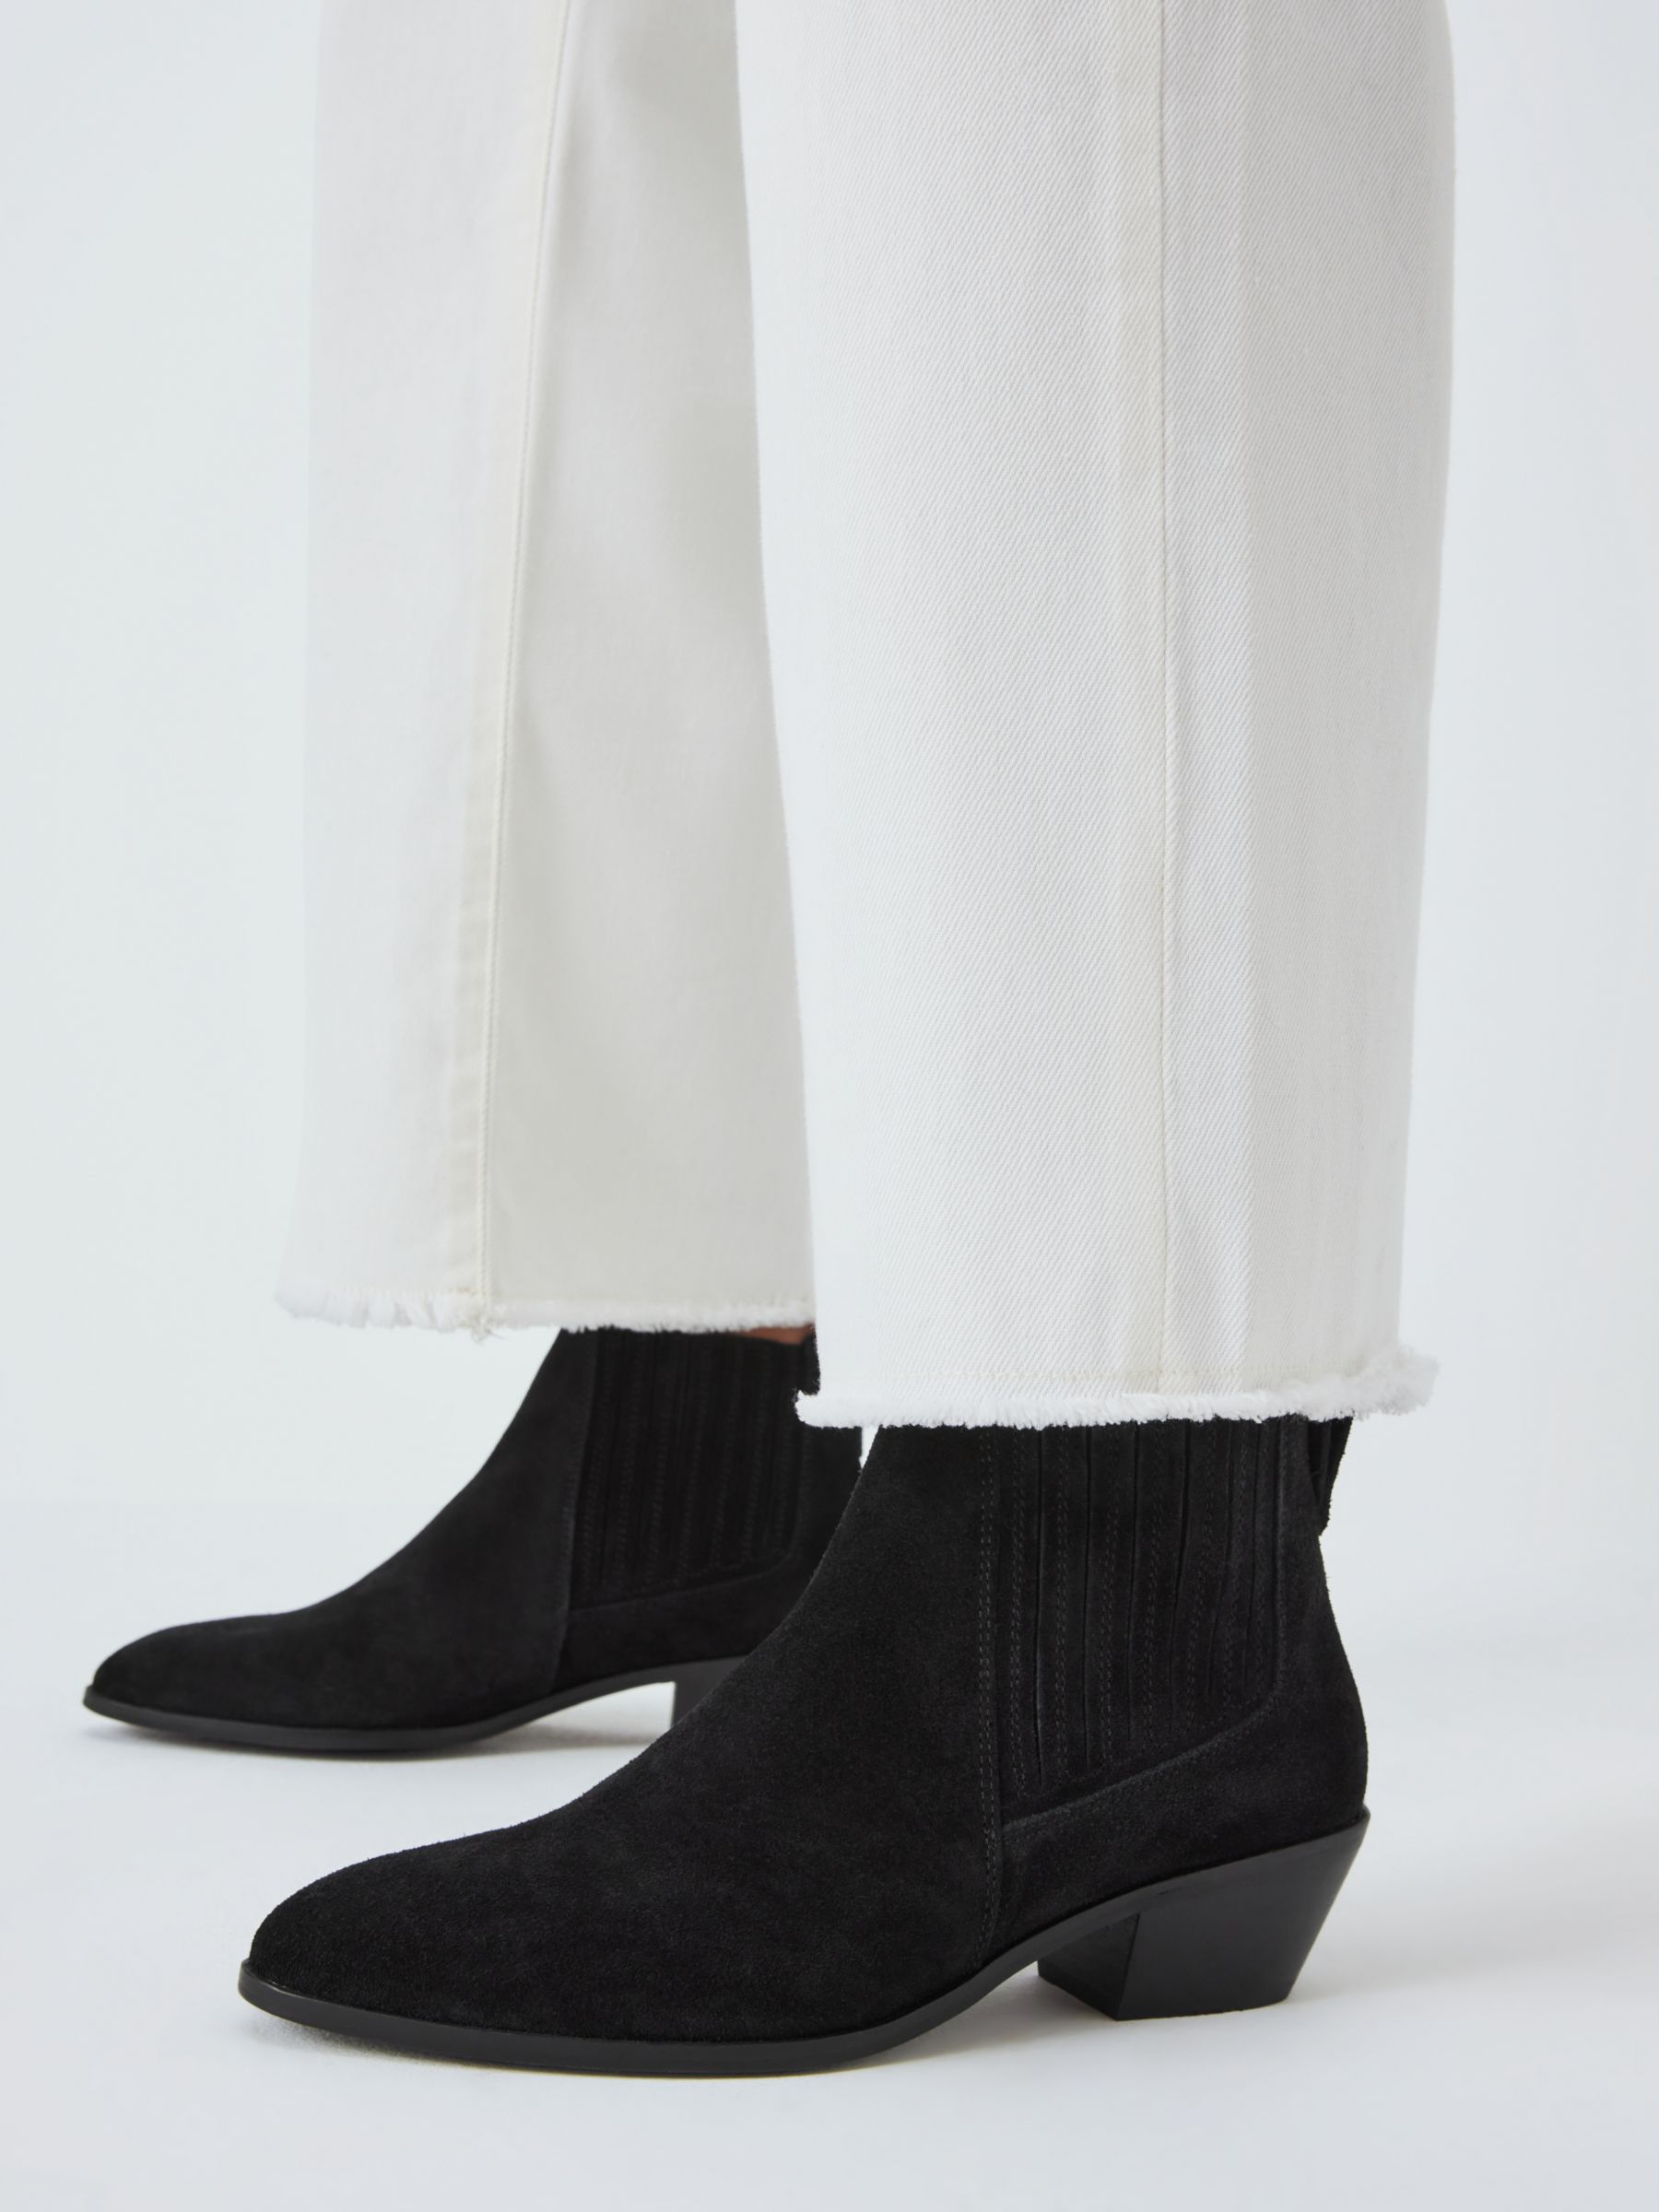 Buy John Lewis Porto Cropped Almond Toe Western Boots Online at johnlewis.com